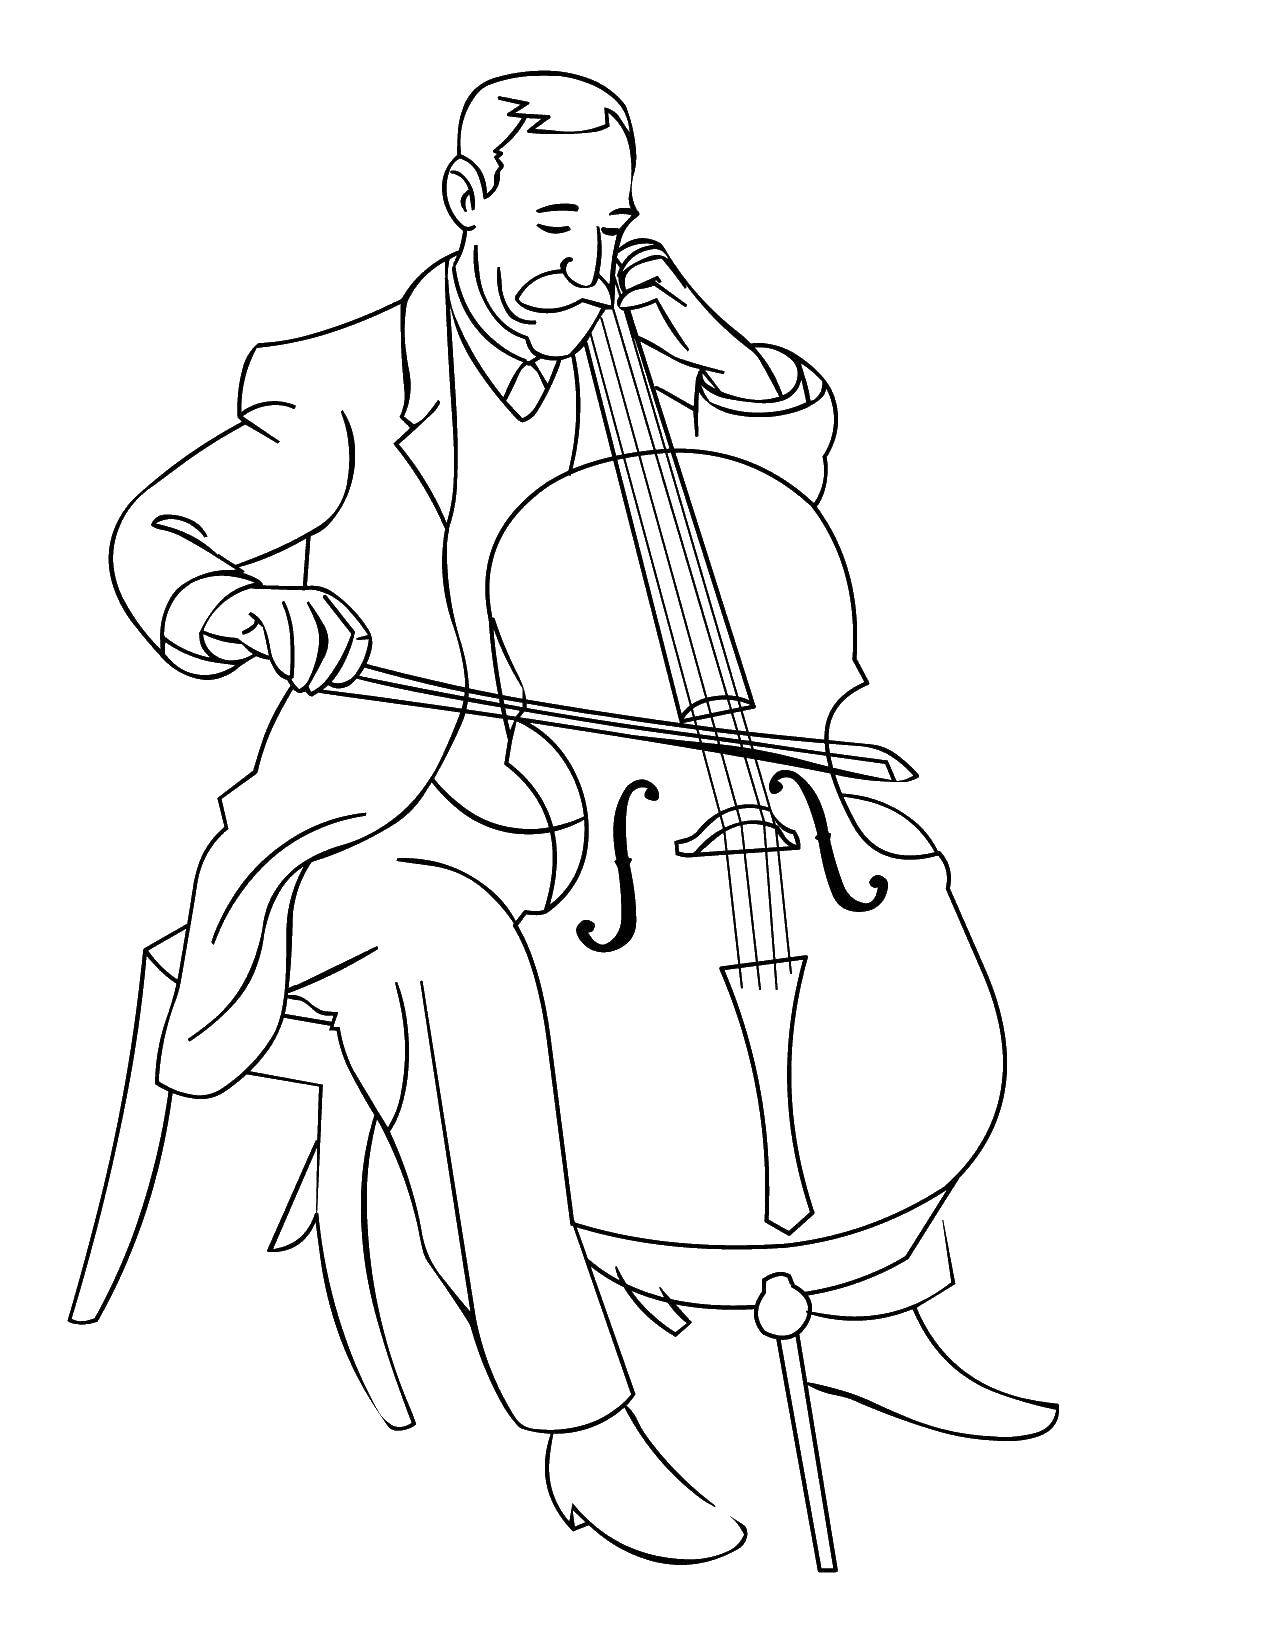 Coloring Cellist. Category Music. Tags:  Music, instrument, musician, note.